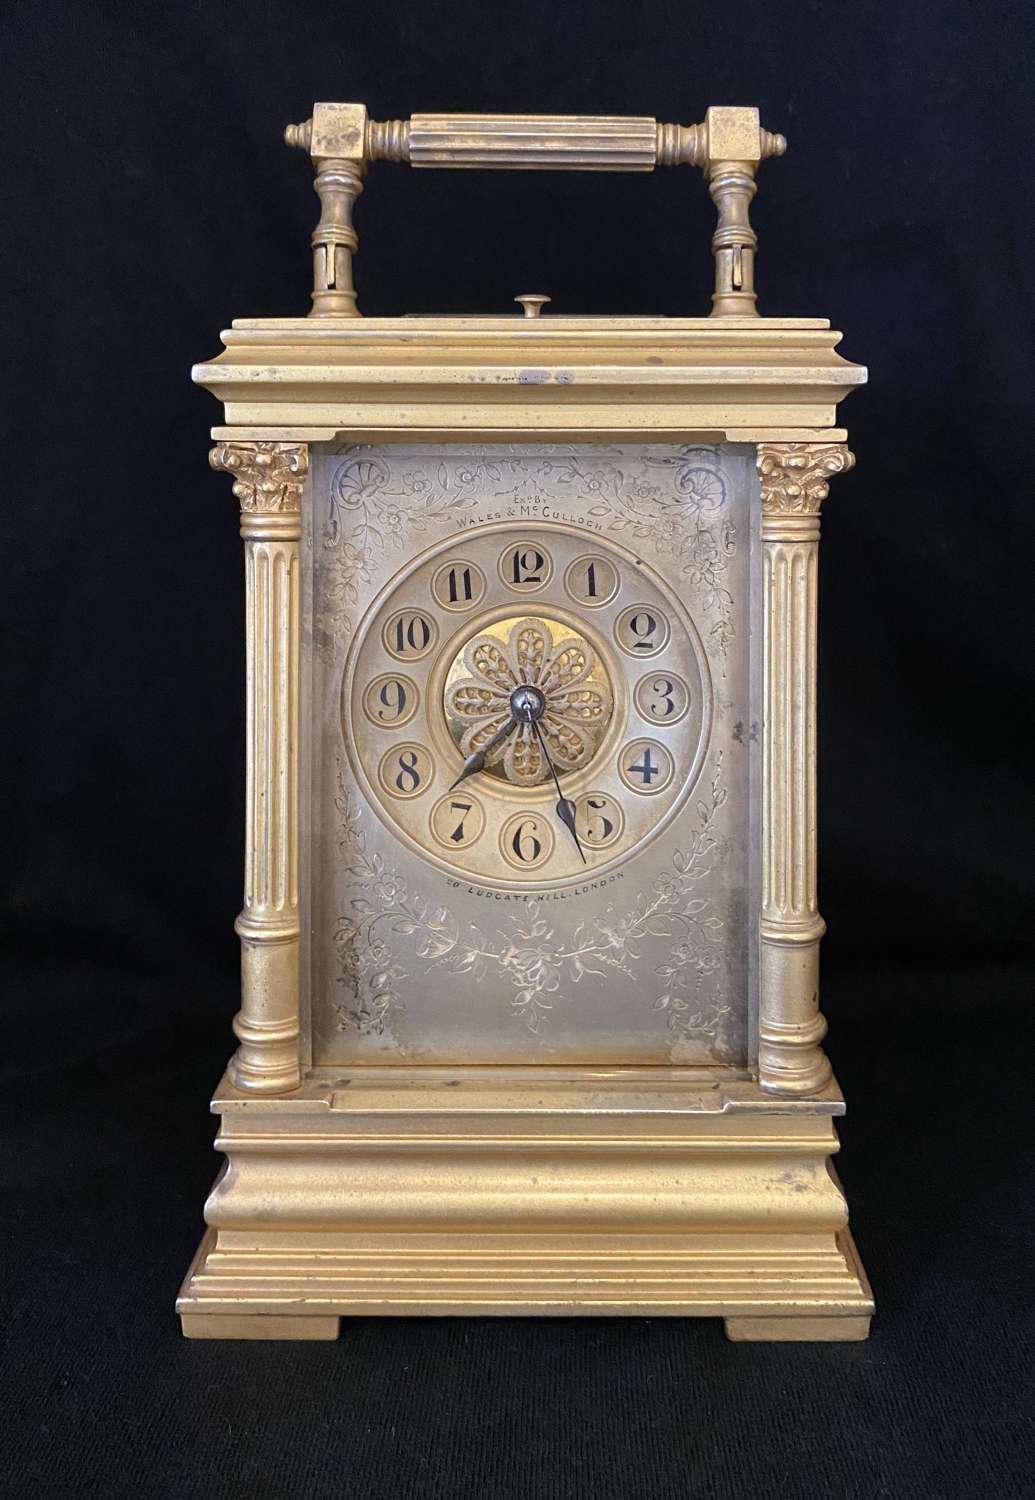 A Cased Striking Carriage Clock